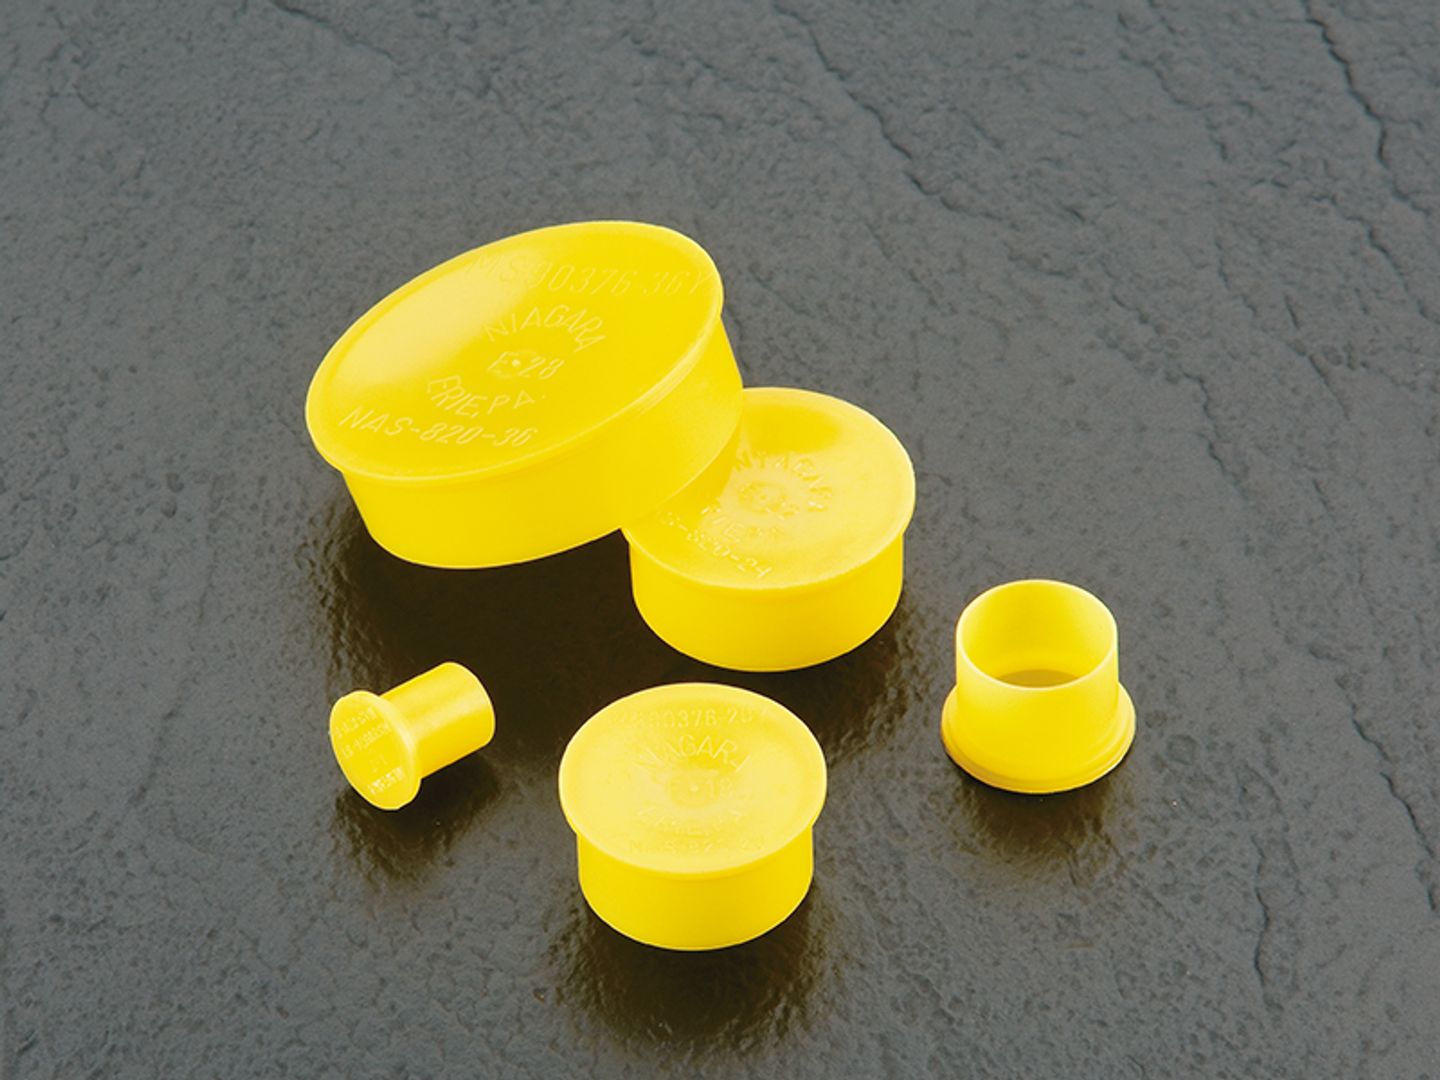 Qty:10 Caplugs EP-18 Yellow Plugs for 1-1/8-18 Threaded Connectors 